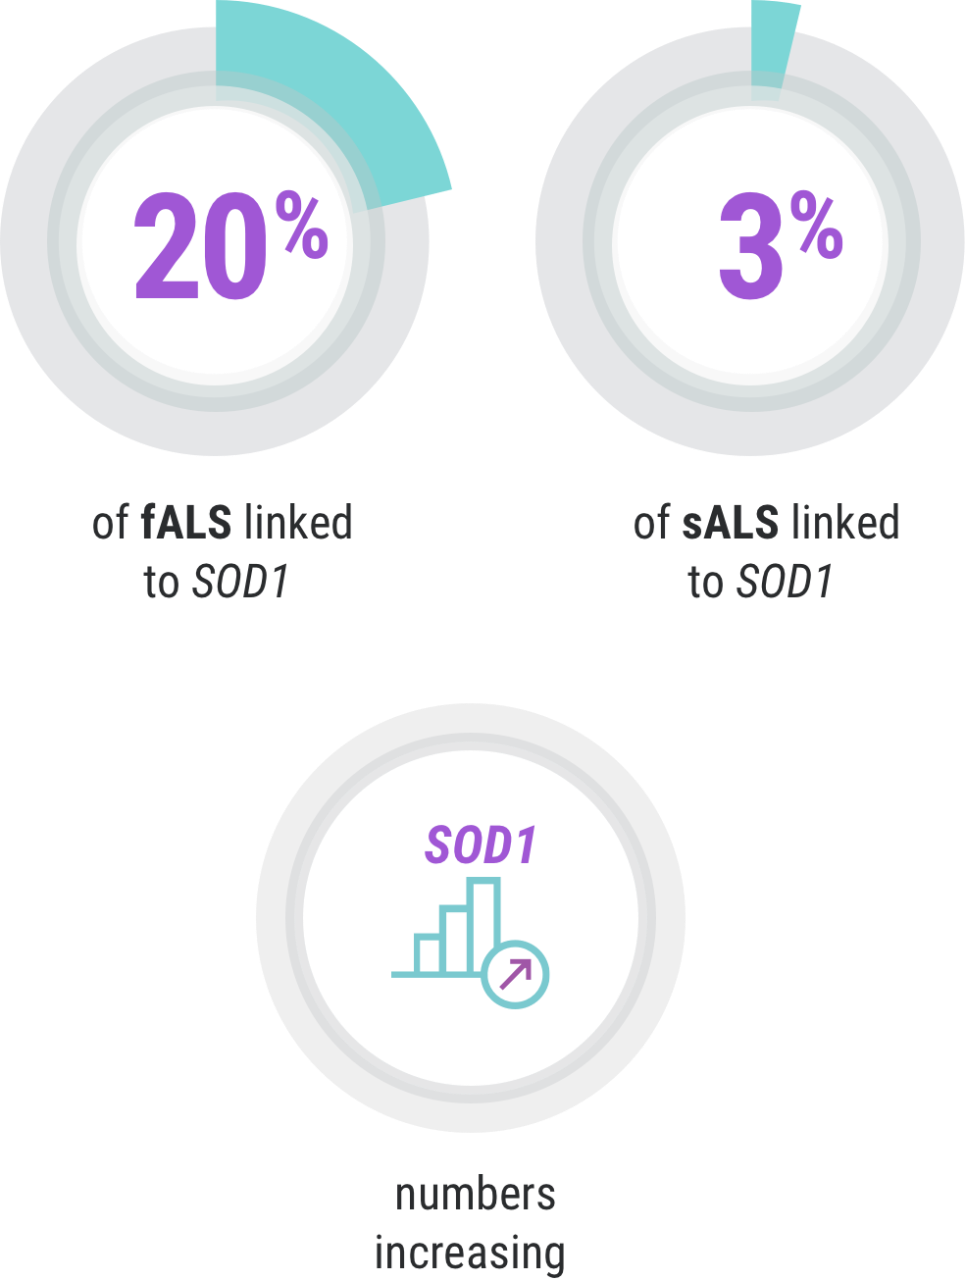 Infographic showing percentage of ALS cases linked to SOD1 mutation